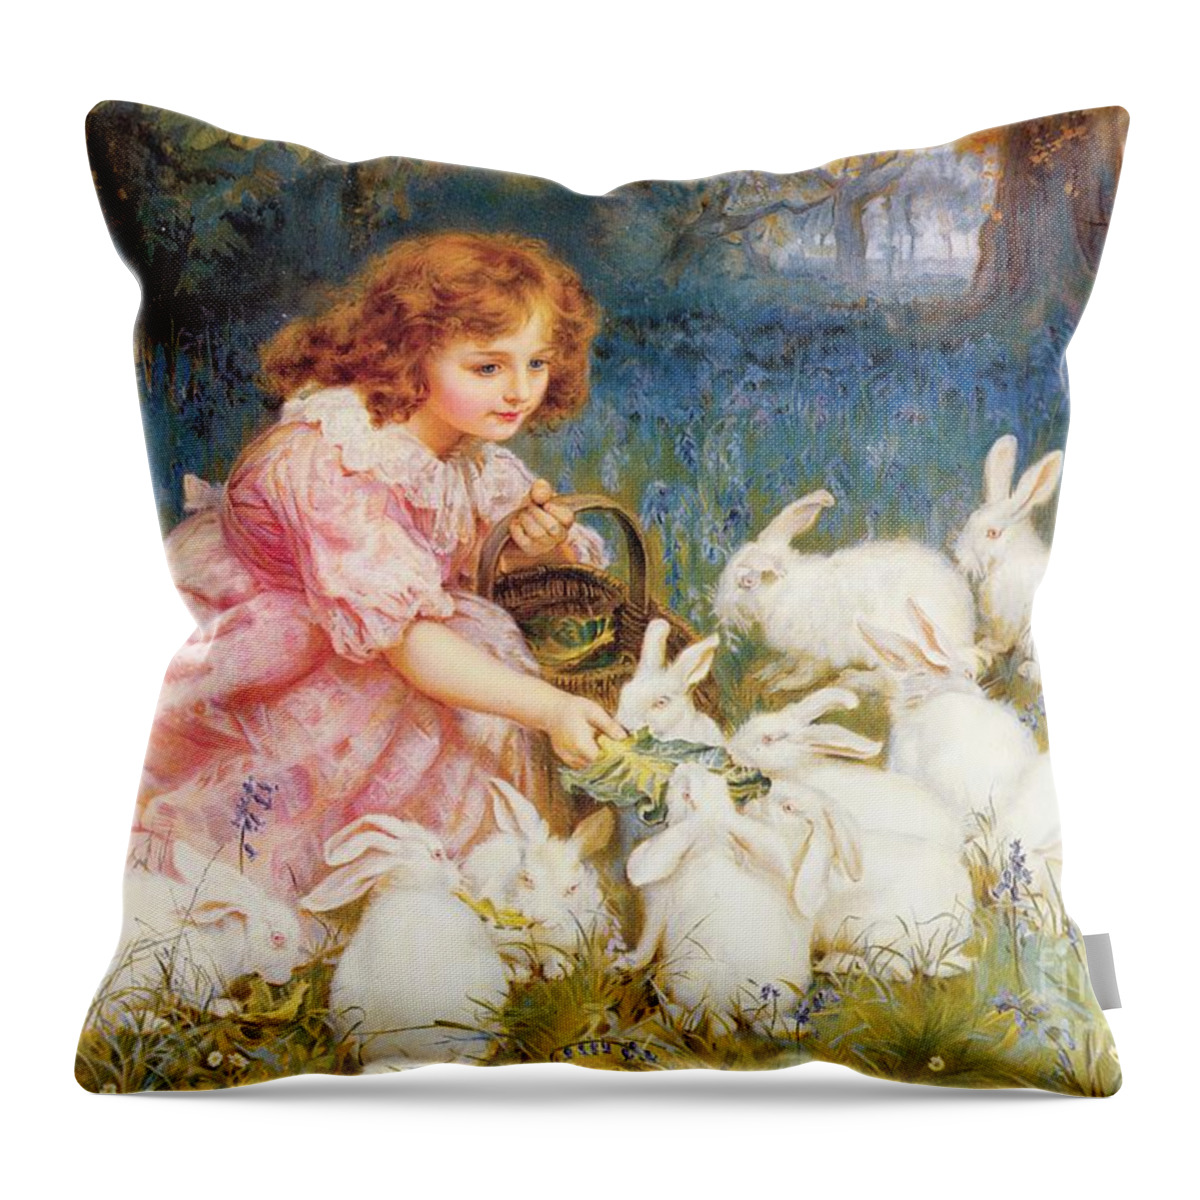 Feeding Throw Pillow featuring the painting Feeding the Rabbits by Frederick Morgan